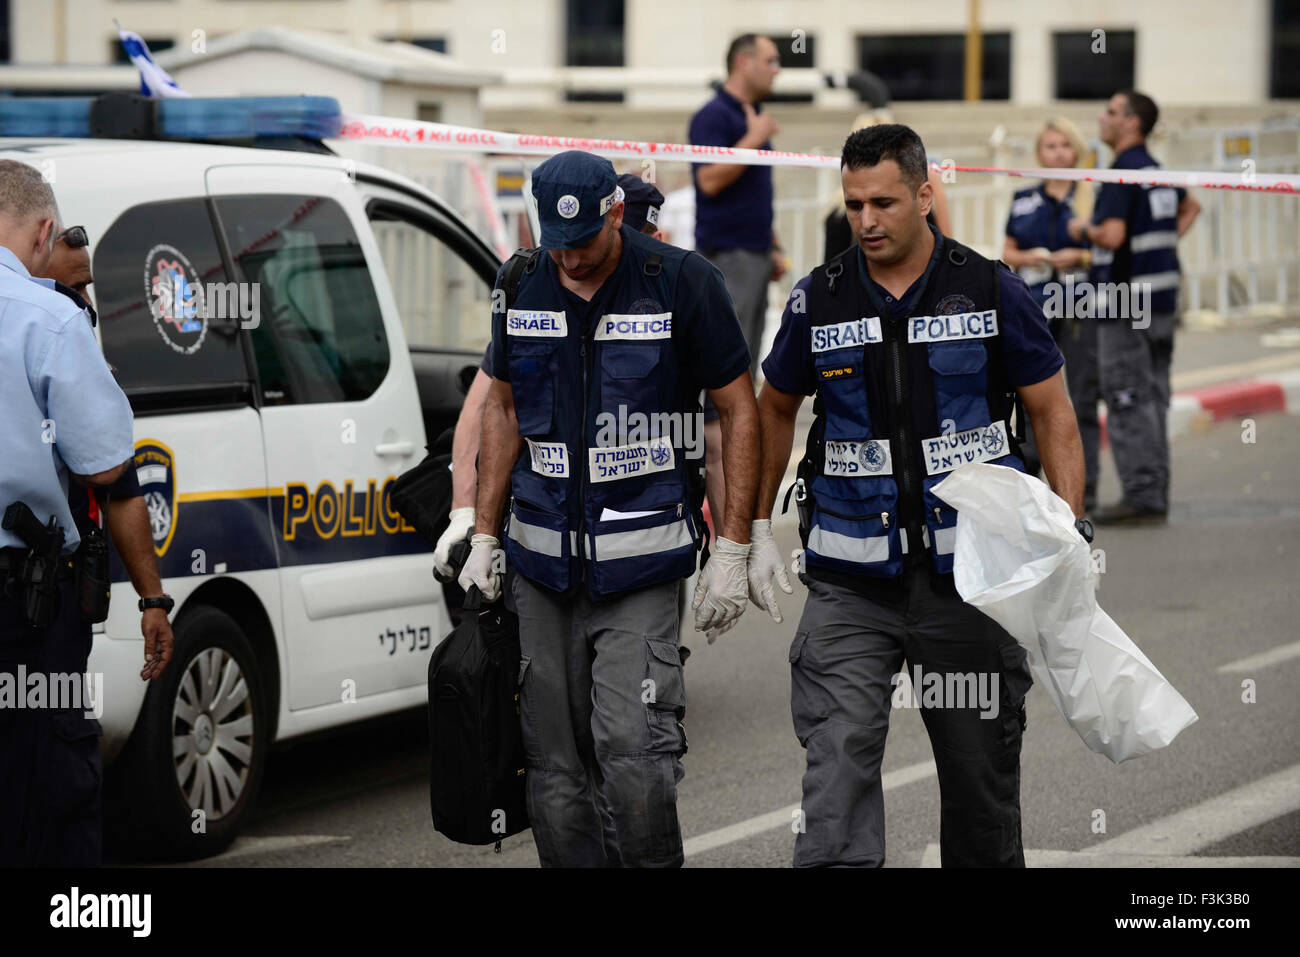 (151009) -- TEL AVIV, Oct. 9, 2015 (Xinhua) -- Israeli policemen work on the scene of an attack in Begin Street, central Tel Aviv, on Oct. 8, 2015. A Palestinian man was shot and killed on Thursday after stabbing two Israelis in Tel Aviv, as violence between Israelis and Palestinians spiraled, Israeli officials said. Police said the incident was a 'suspected terror attack,' and the assailant was 'neutralized.' A police spokesperson later added that the assailant stabbed a female soldier with a screwdriver in Begin Street, near the Defense Ministry and IDF headquarters complex. He then stabbed Stock Photo